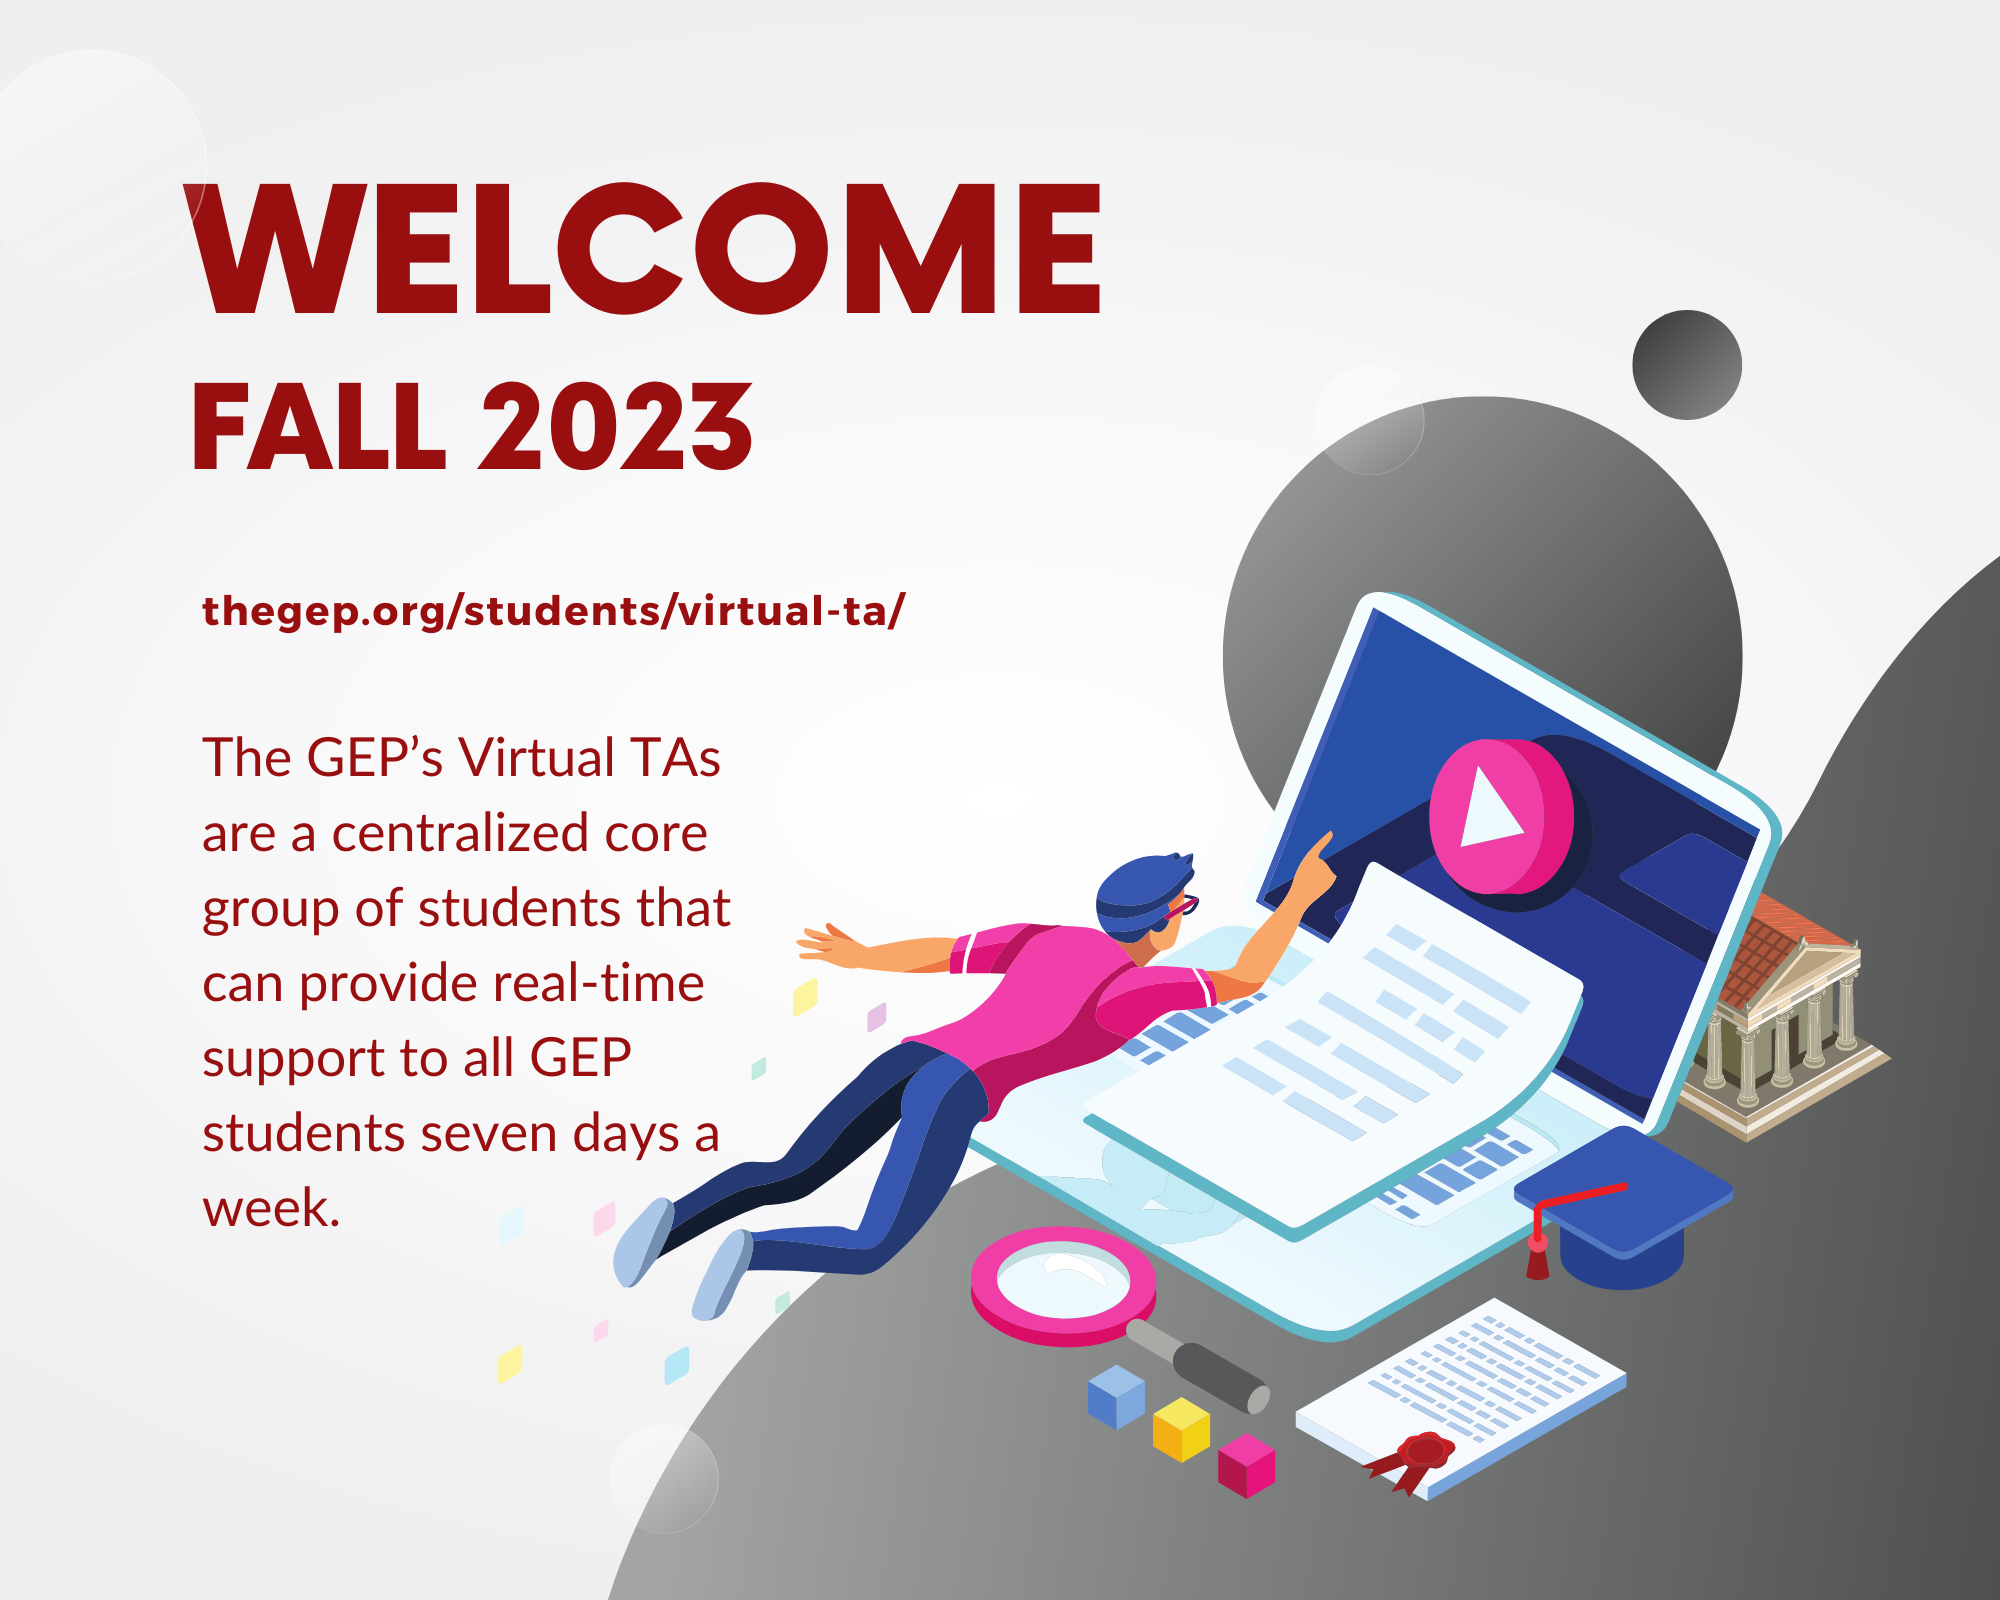 Welcome Fall 2023 The GEP’s Virtual TAs are a centralized core group of students that can provide real-time support to all GEP students seven days a week.